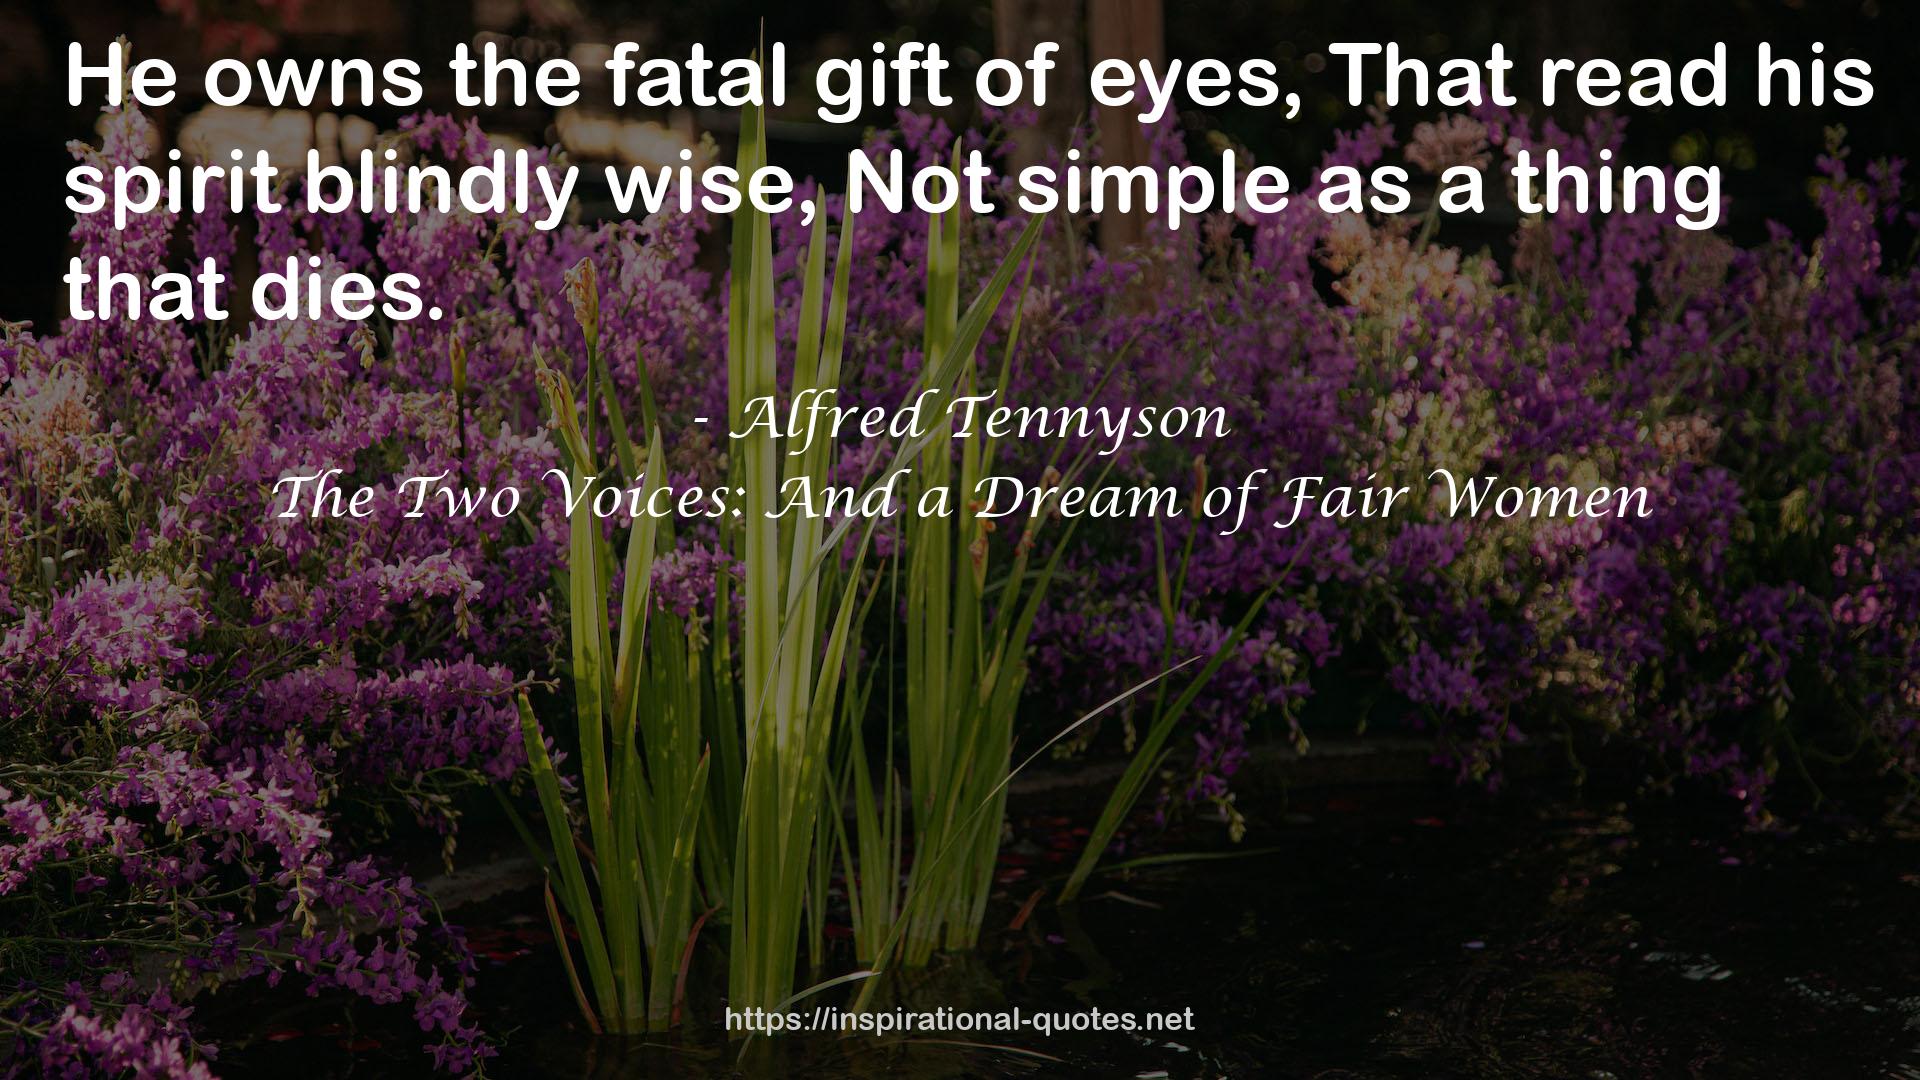 The Two Voices: And a Dream of Fair Women QUOTES